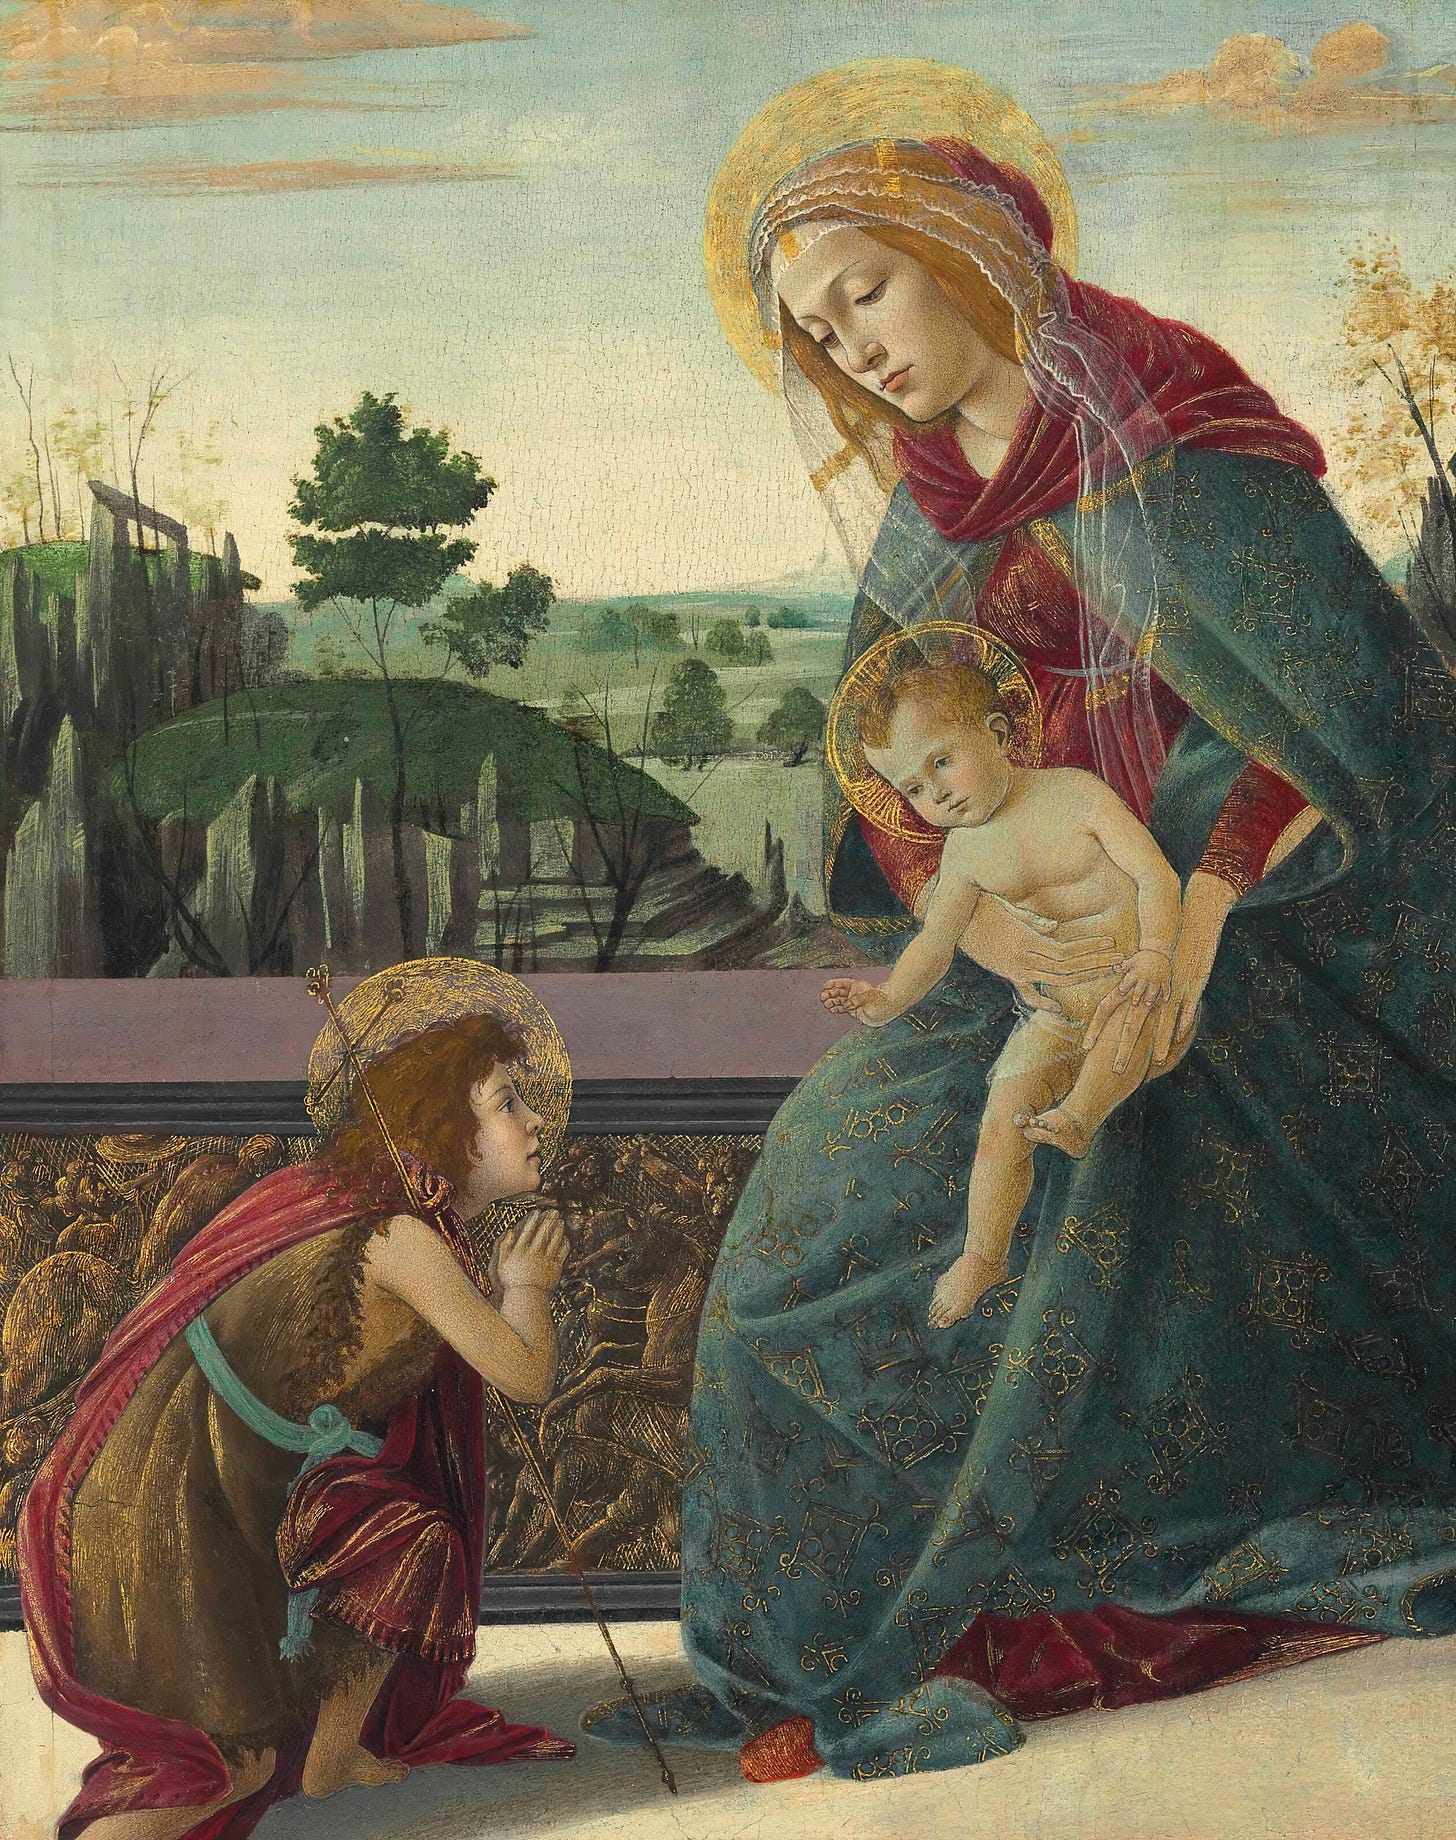 Madonna and Child with Young Saint John the Baptist by Sandro Botticelli (Italian, 1444-1510)